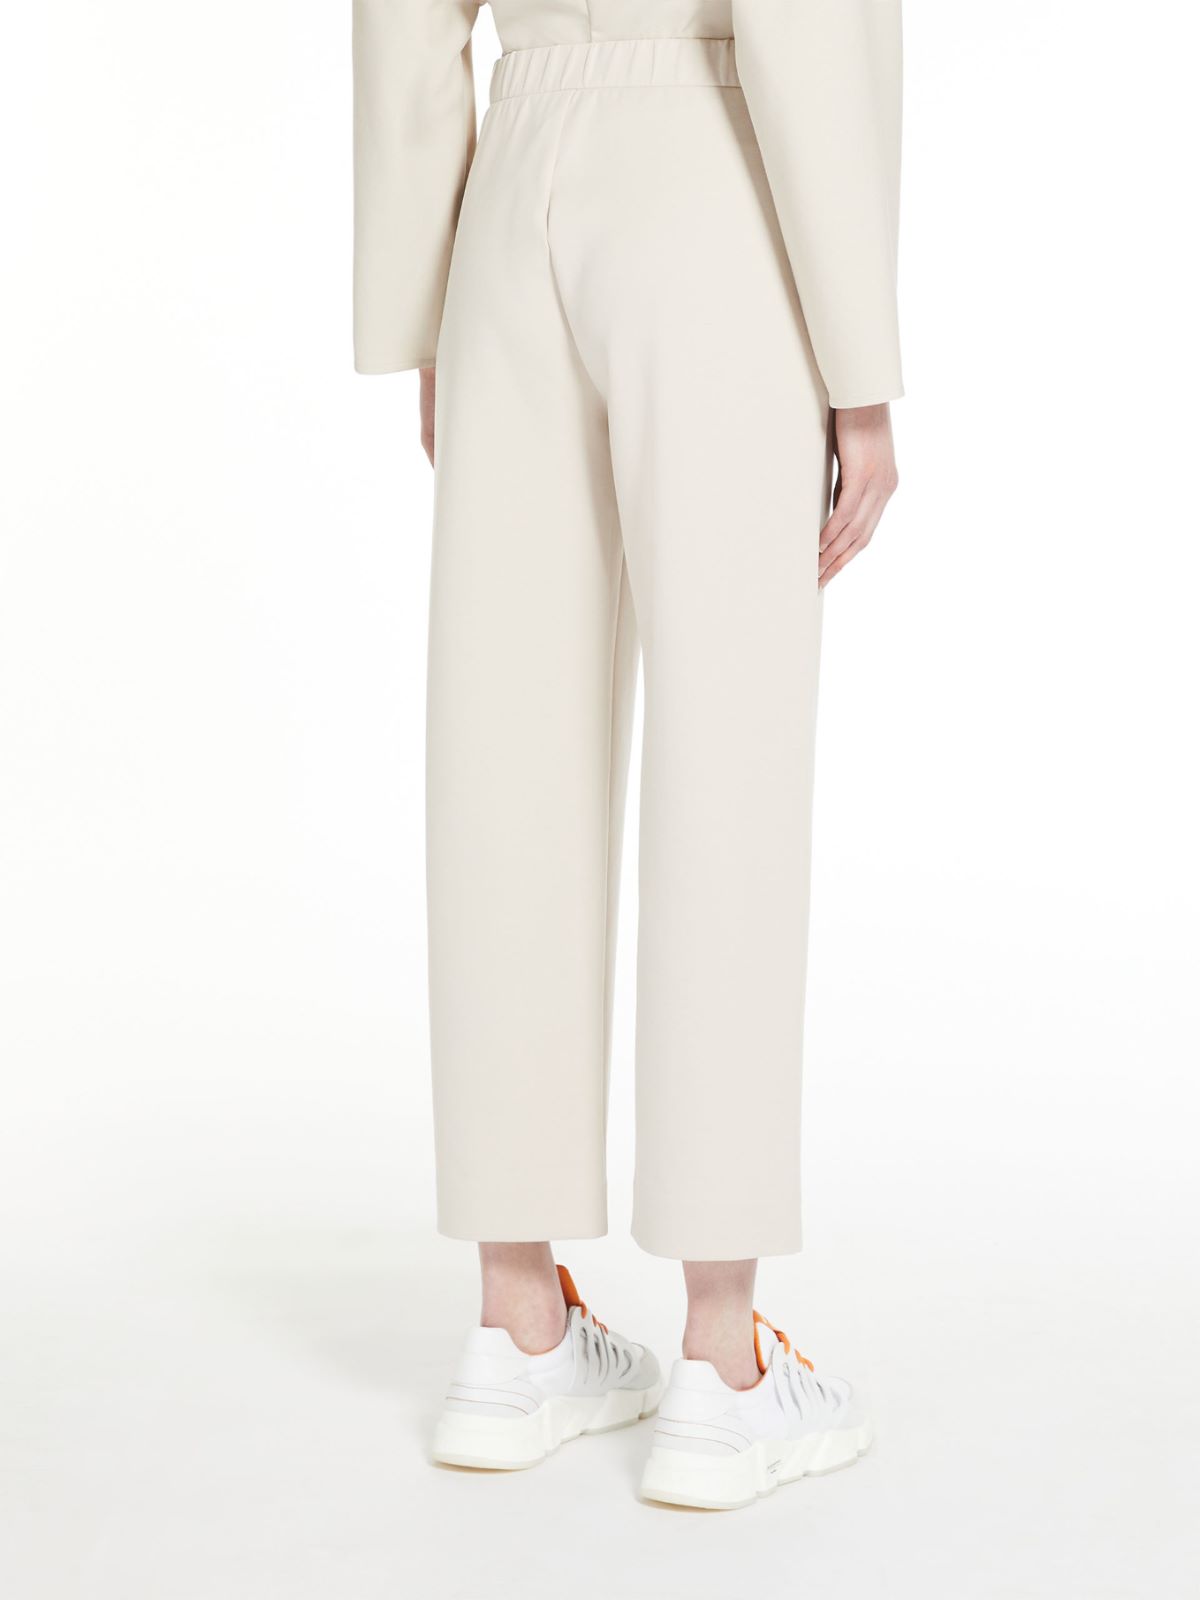 Jersey trousers - SAND - Weekend Max Mara - 3